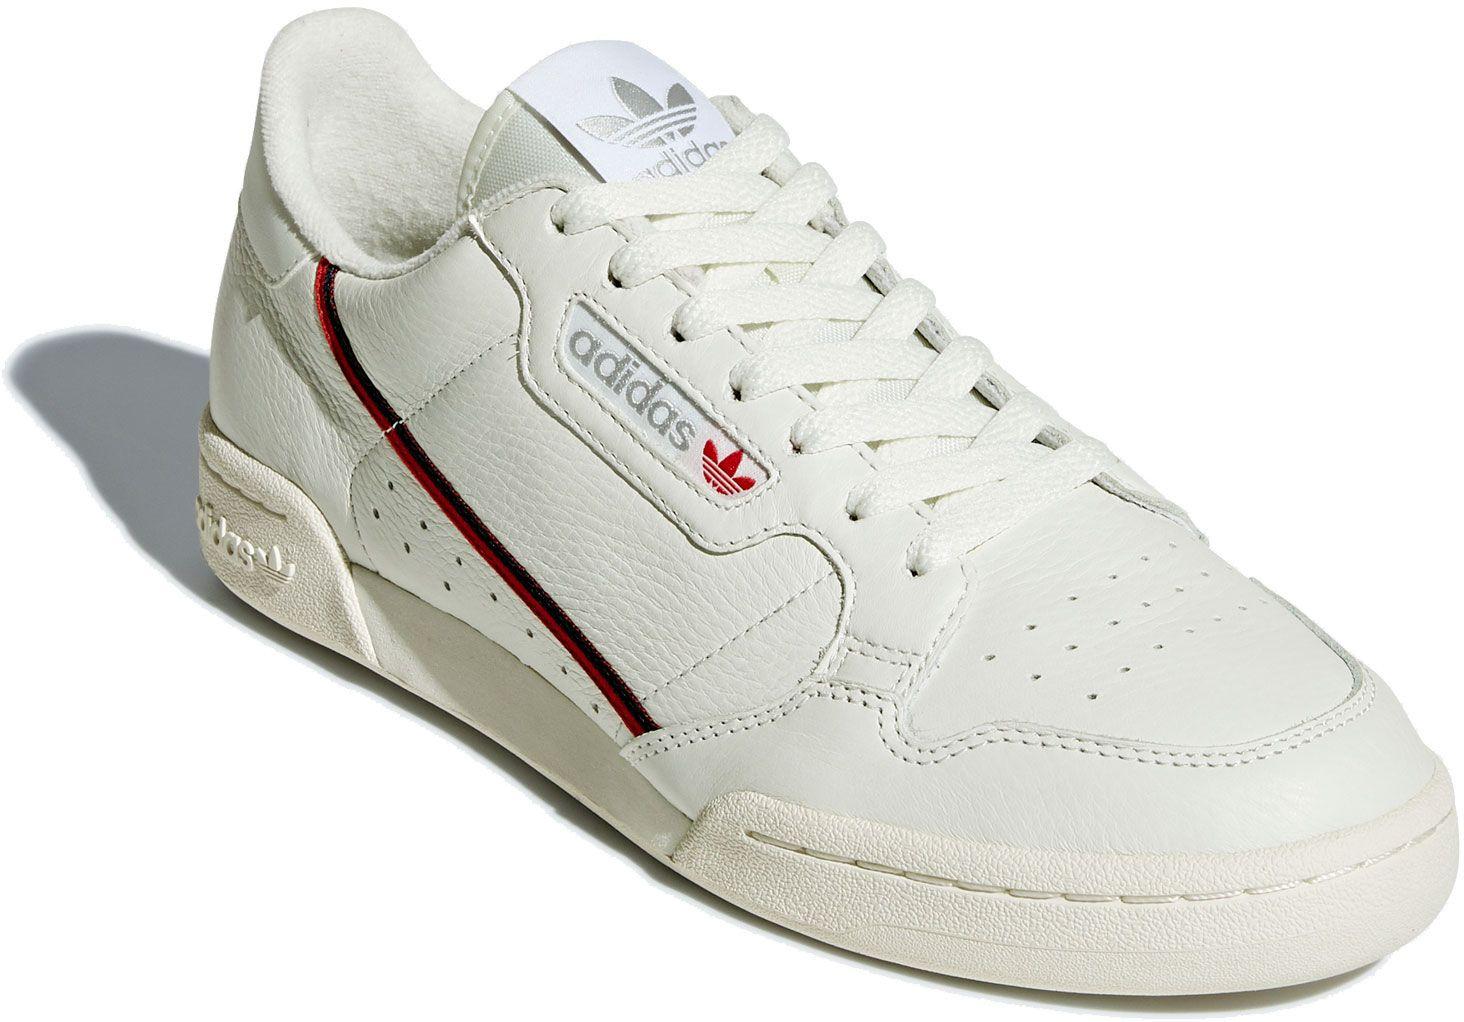 adidas Continental 80 Shoes in White for Men - Lyst